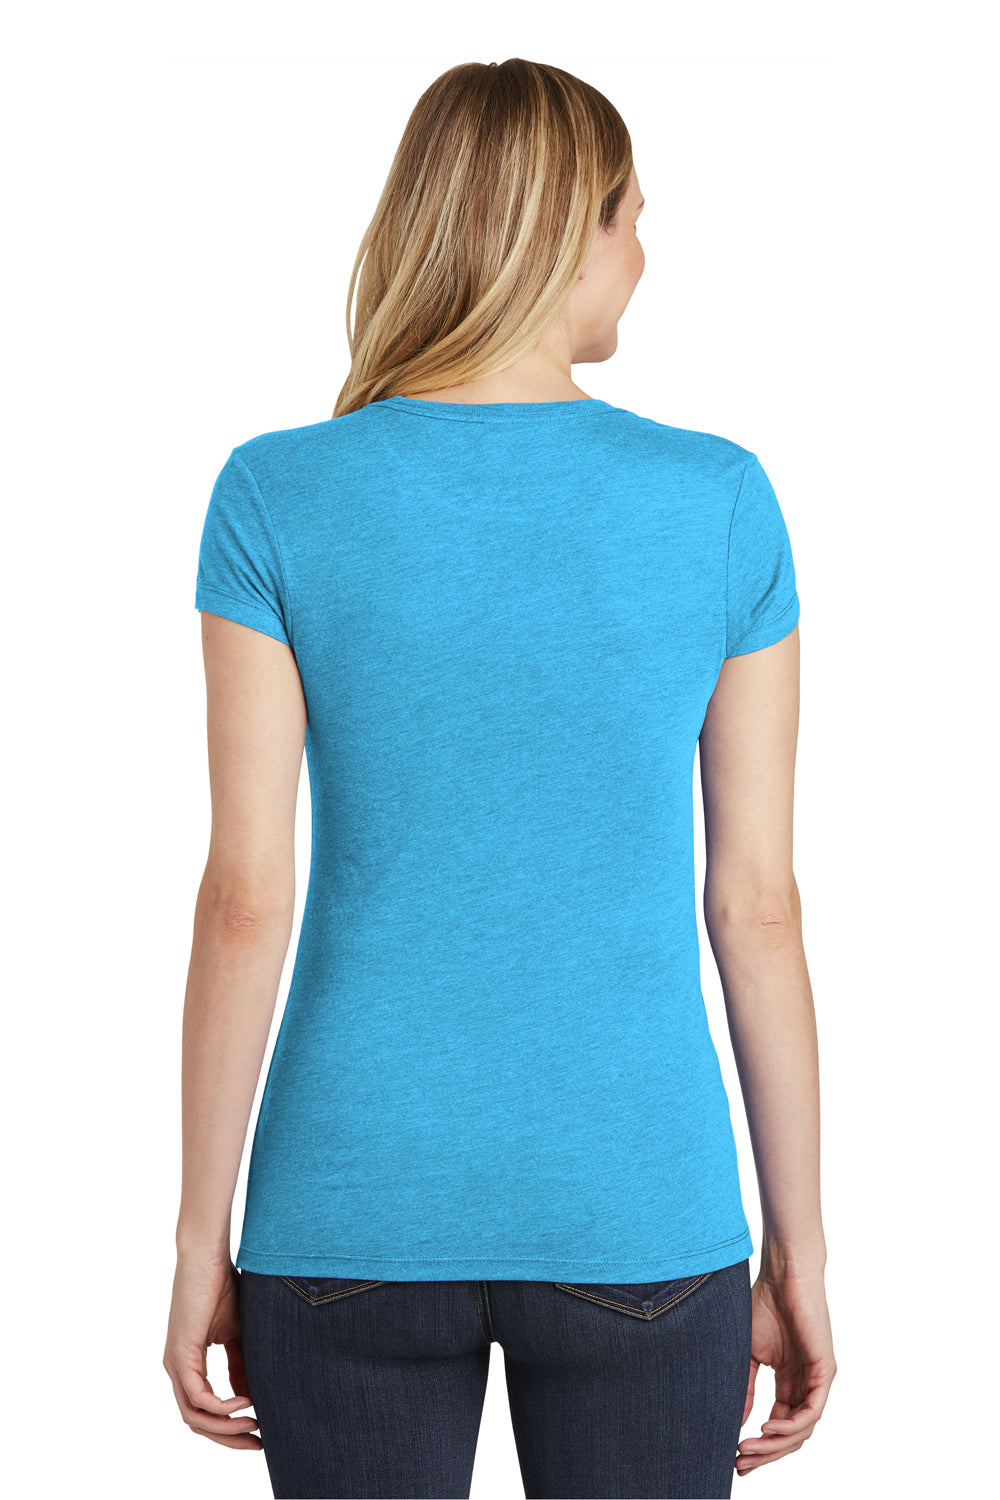 District DT155 Womens Fitted Perfect Tri Short Sleeve Crewneck T-Shirt Turquoise Blue Back